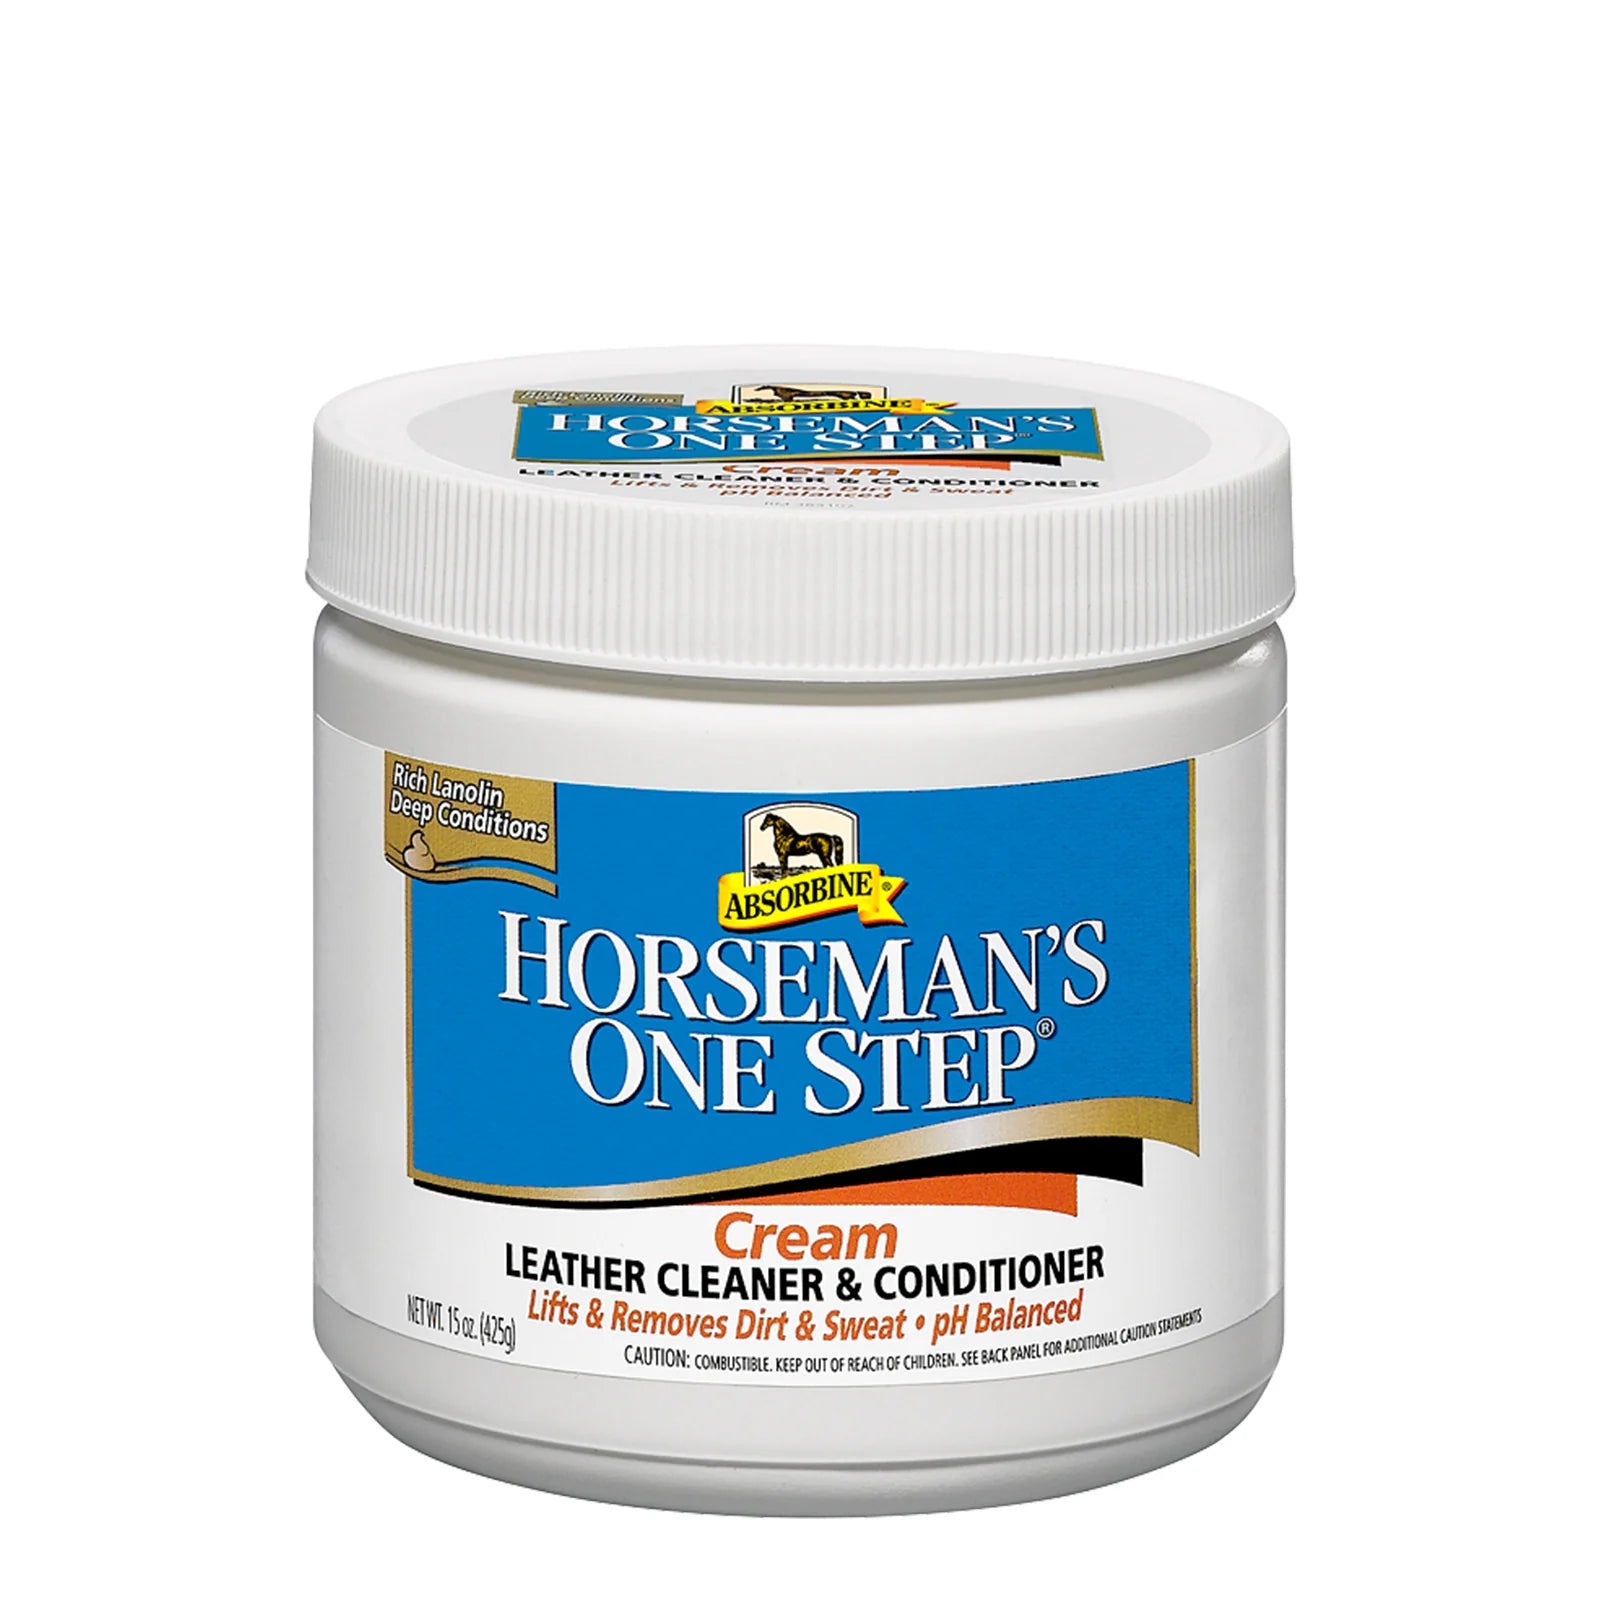 Absorbine Horseman’s One Step® Cream Leather Cleaner & Conditioner